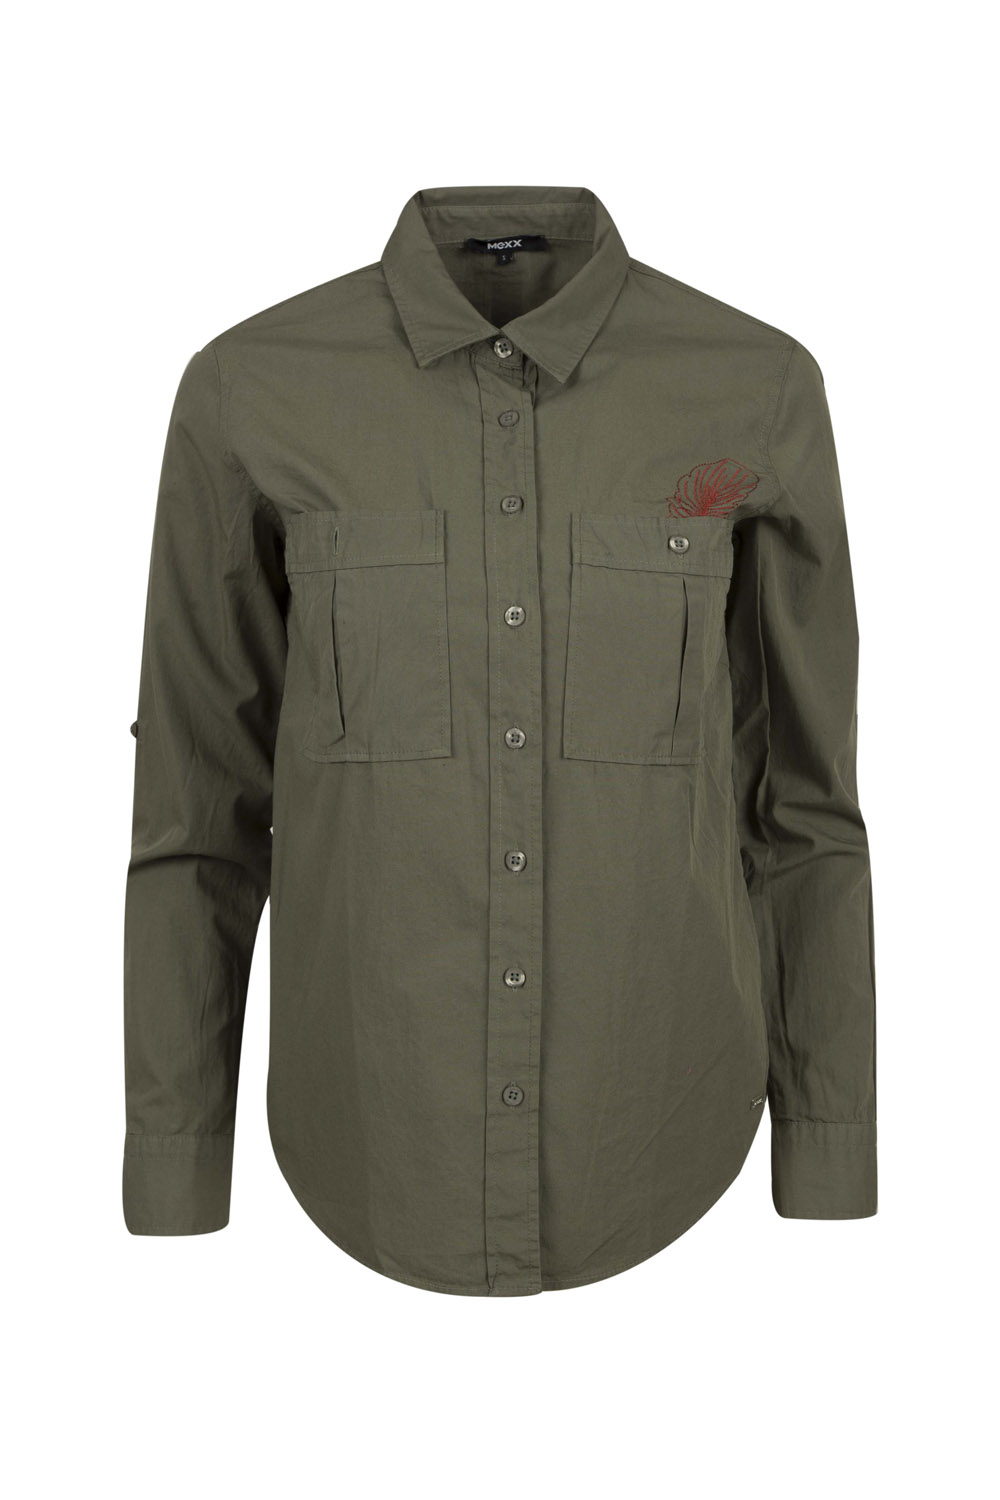 Utility Style Shirt with Sleeve Detail